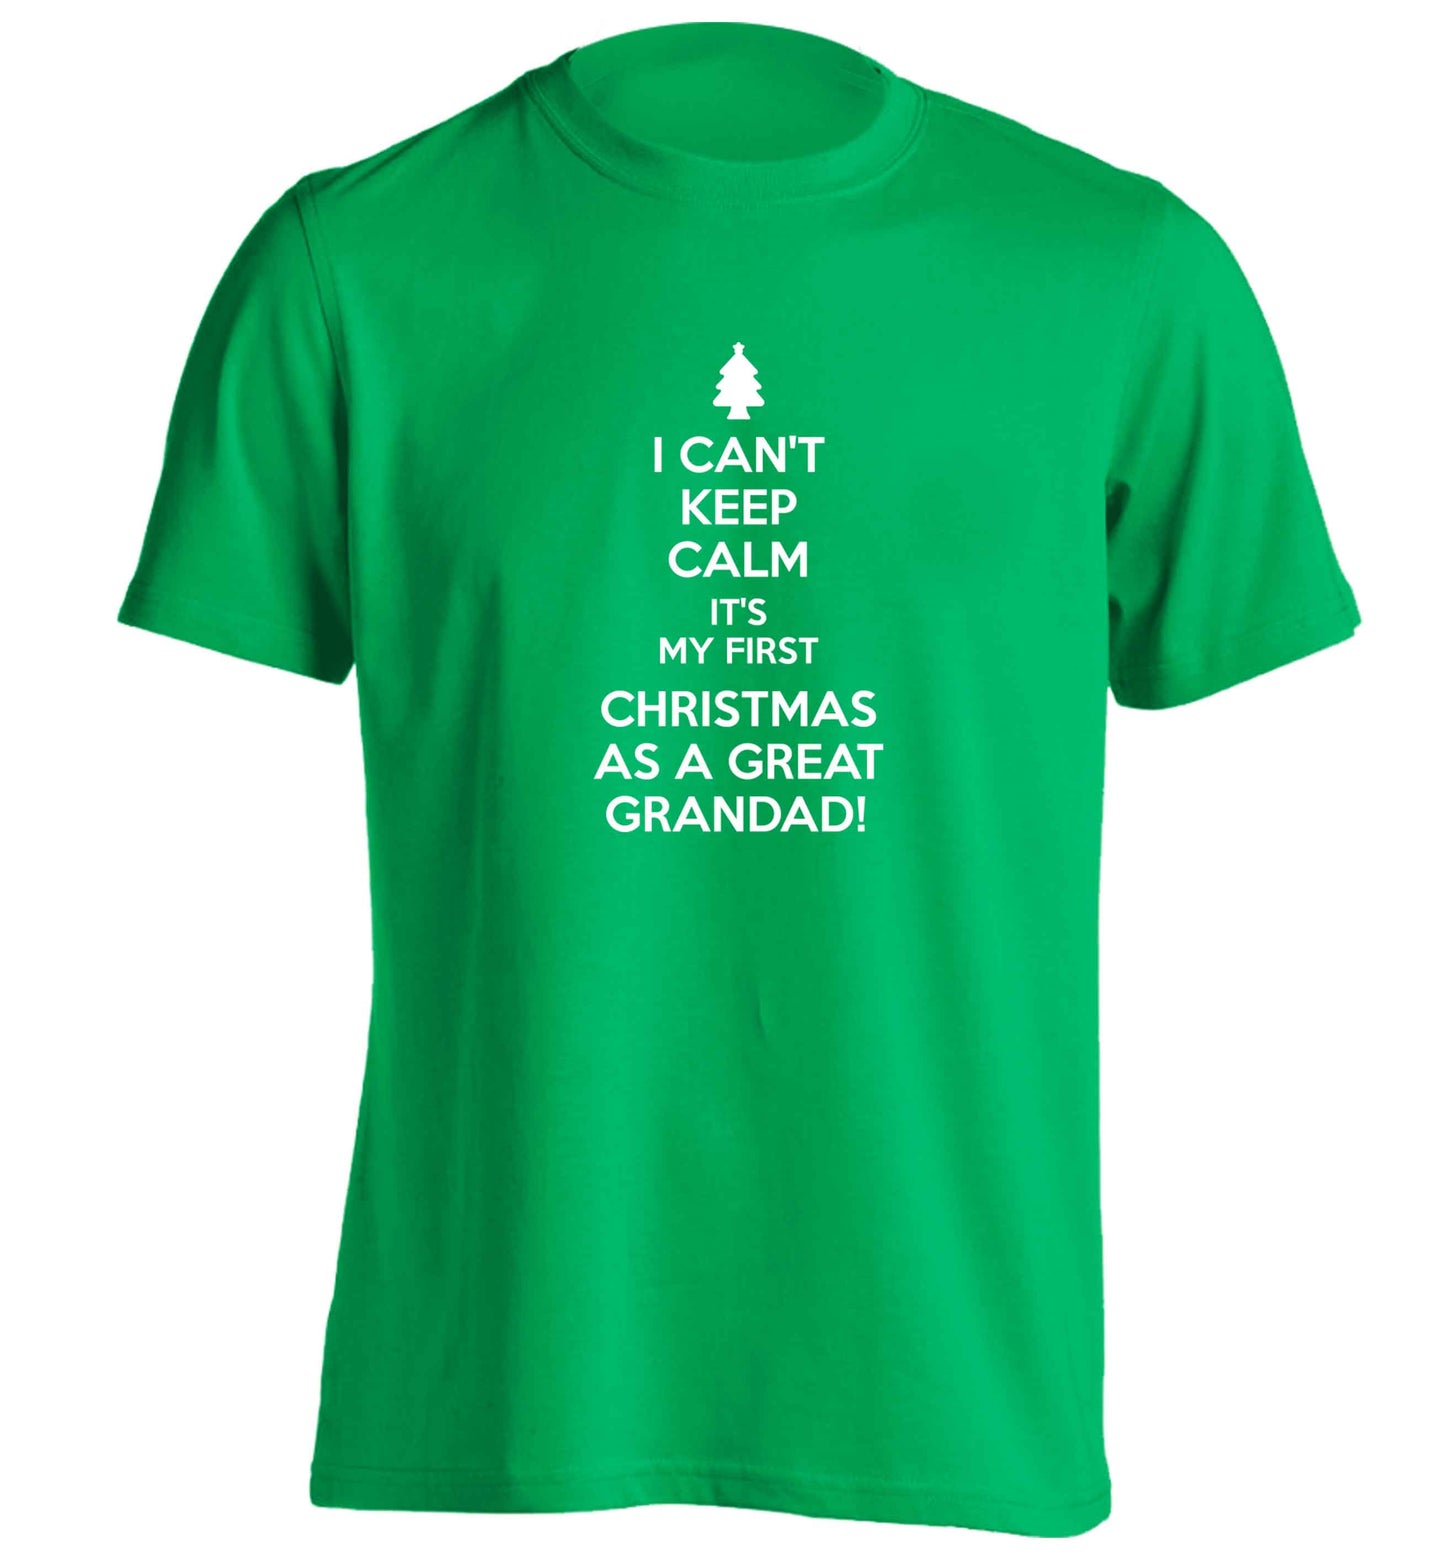 I can't keep calm it's my first Christmas as a great grandad! adults unisex green Tshirt 2XL